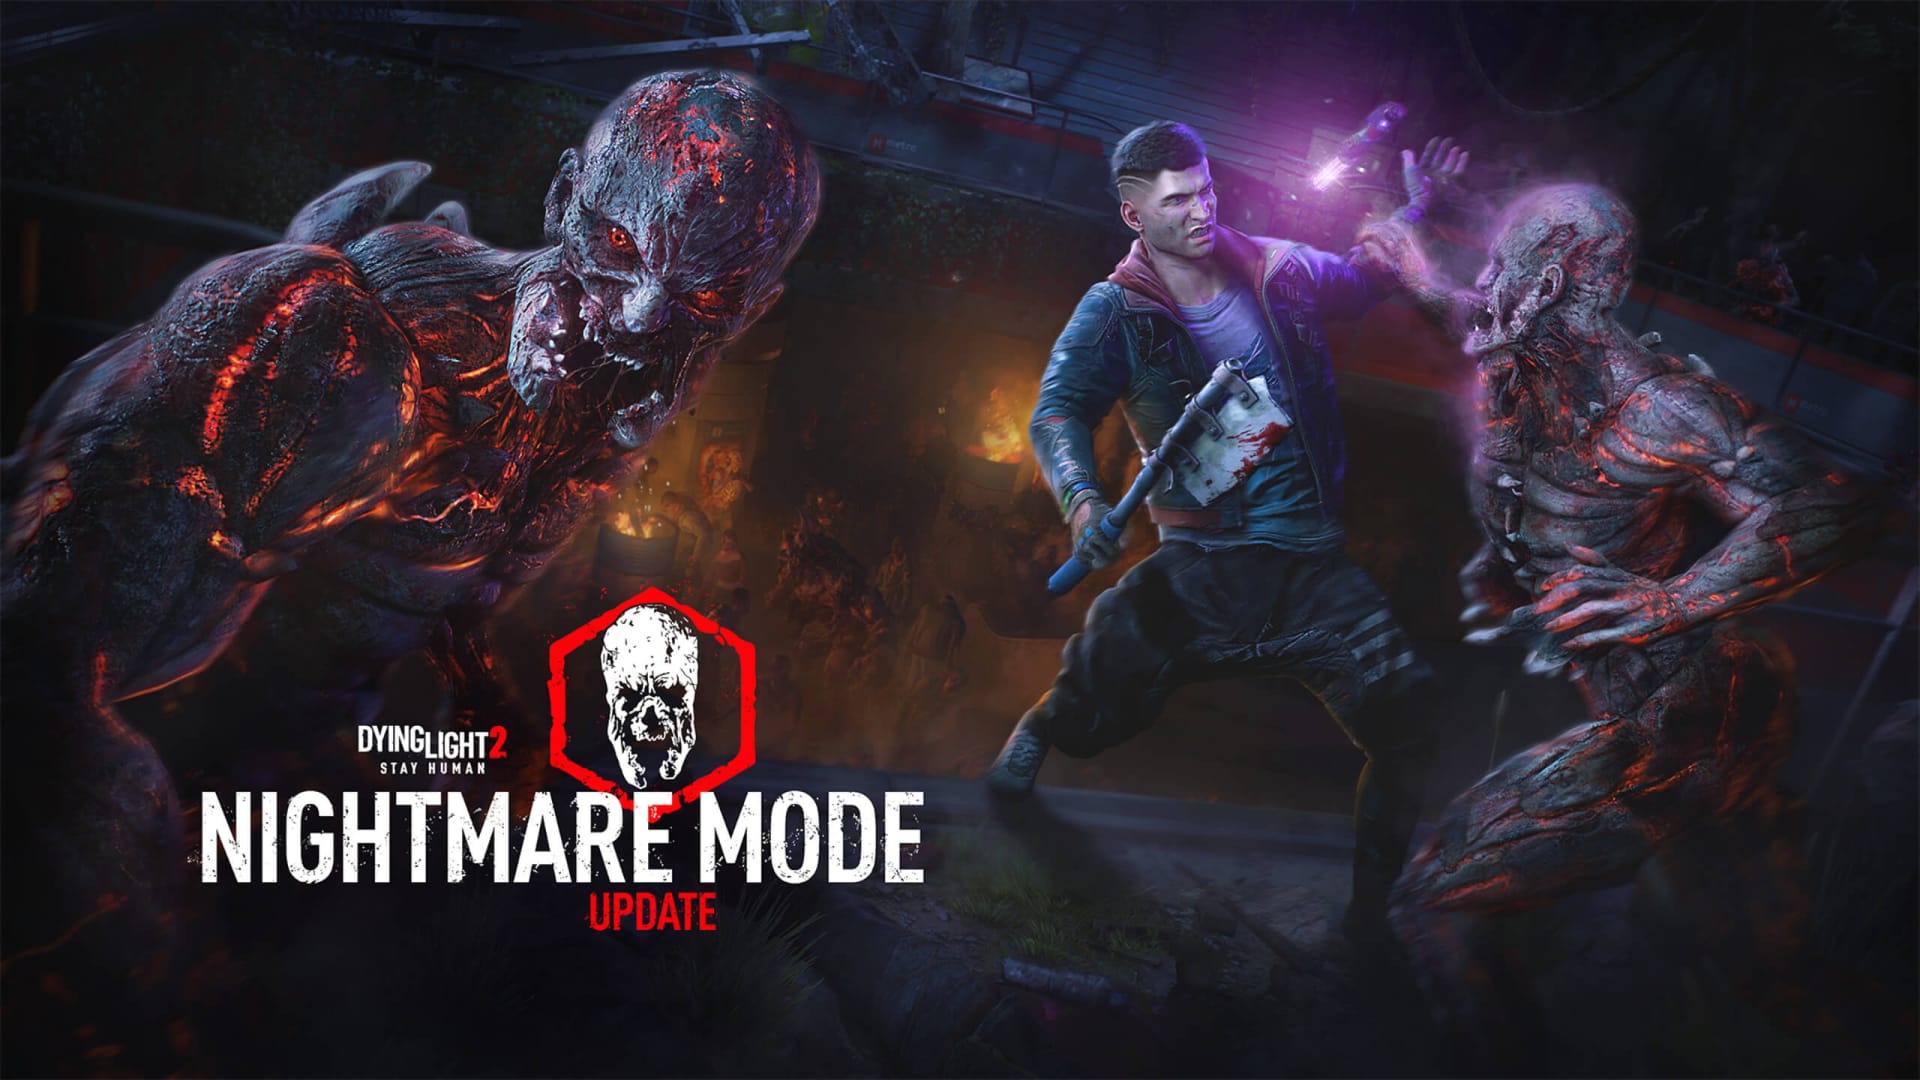 A character fighting off a zombie in artwork for the upcoming Dying Light 2 Nightmare Mode update